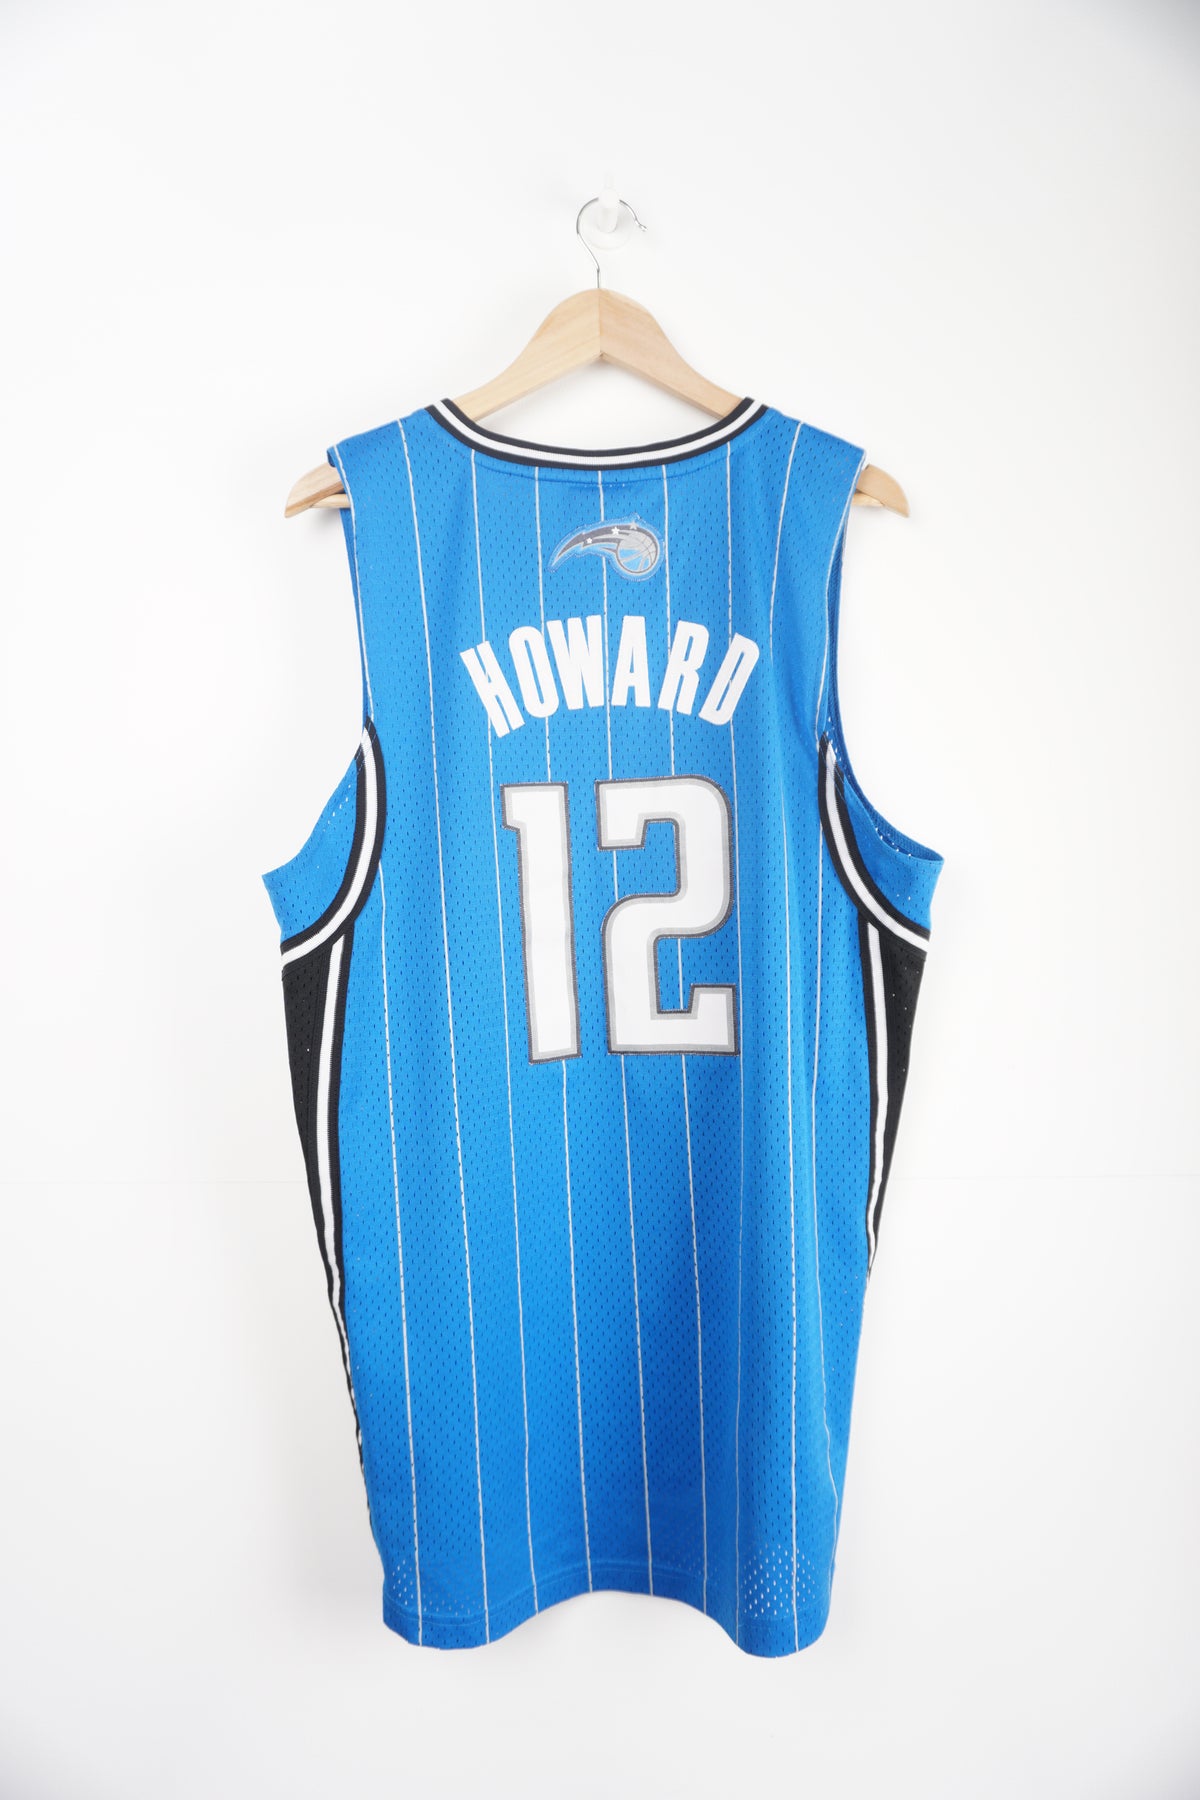 🏀 Dwight Howard Orlando Magic Jersey Size Large – The Throwback Store 🏀